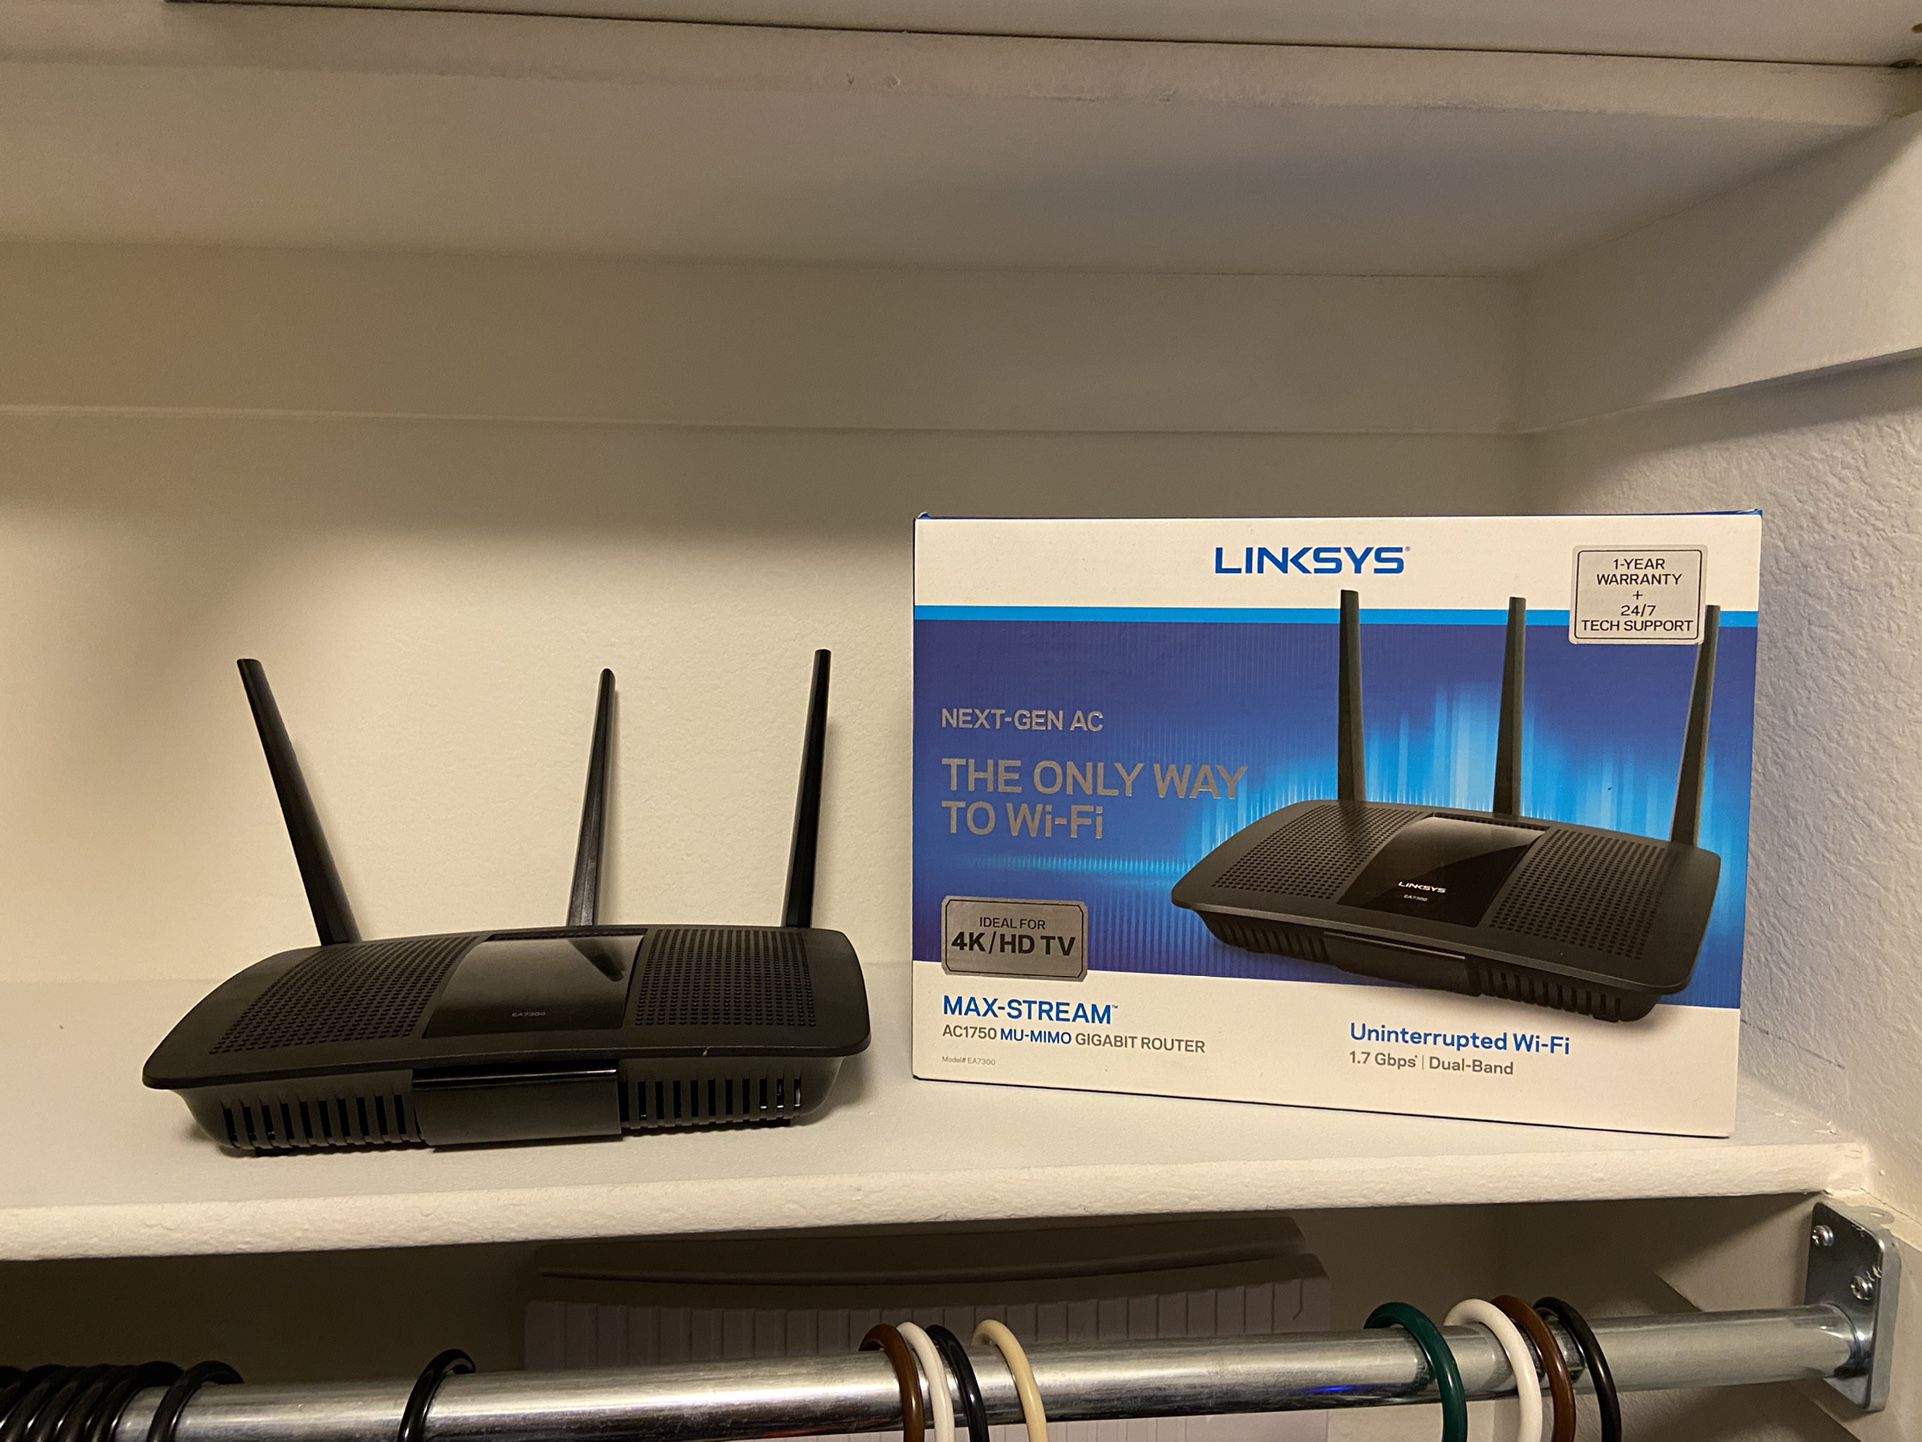 Linksys AC1750 WiFi router